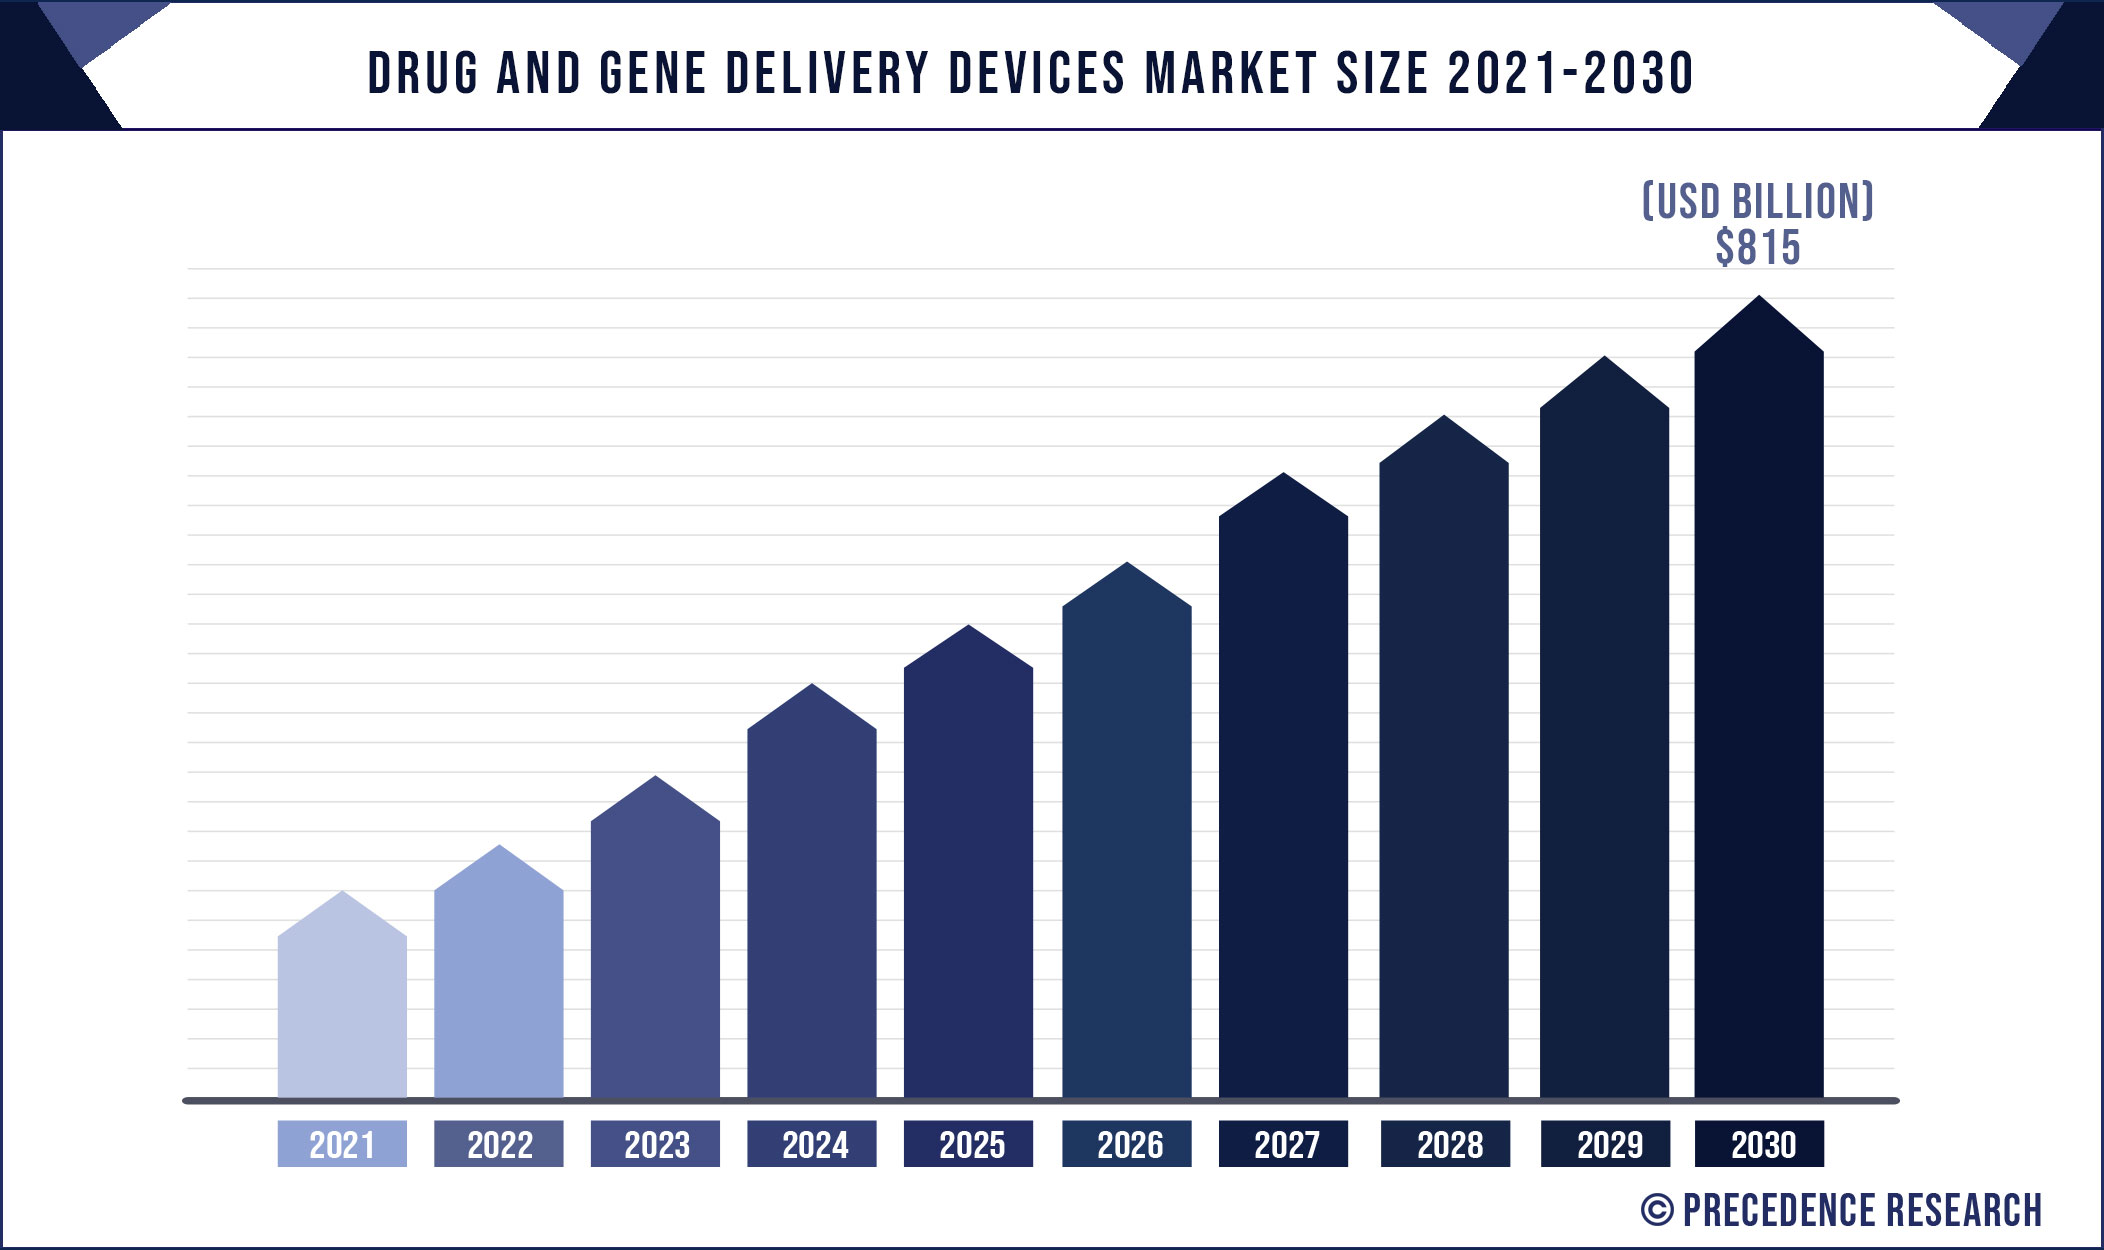 Drug and Gene Delivery Devices Market Worth Over $815 Billion by 2030